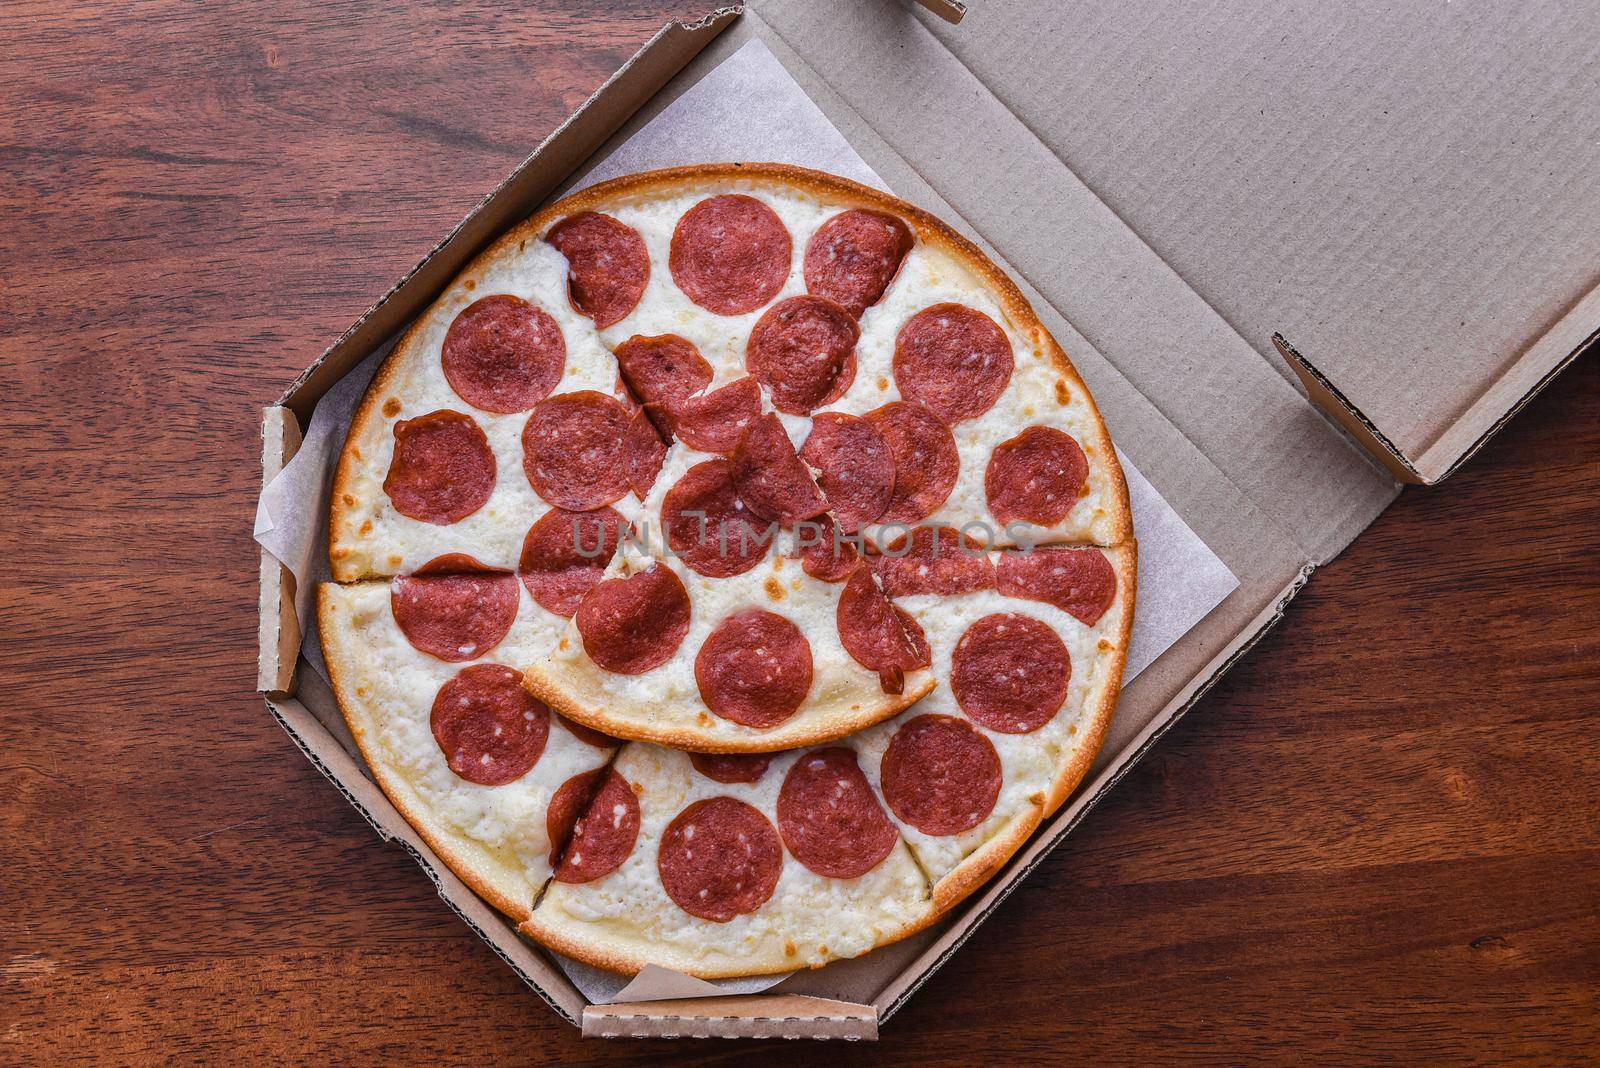 Pepperoni Pizza in open carton box on wooden table, closeup, top view by karpovkottt